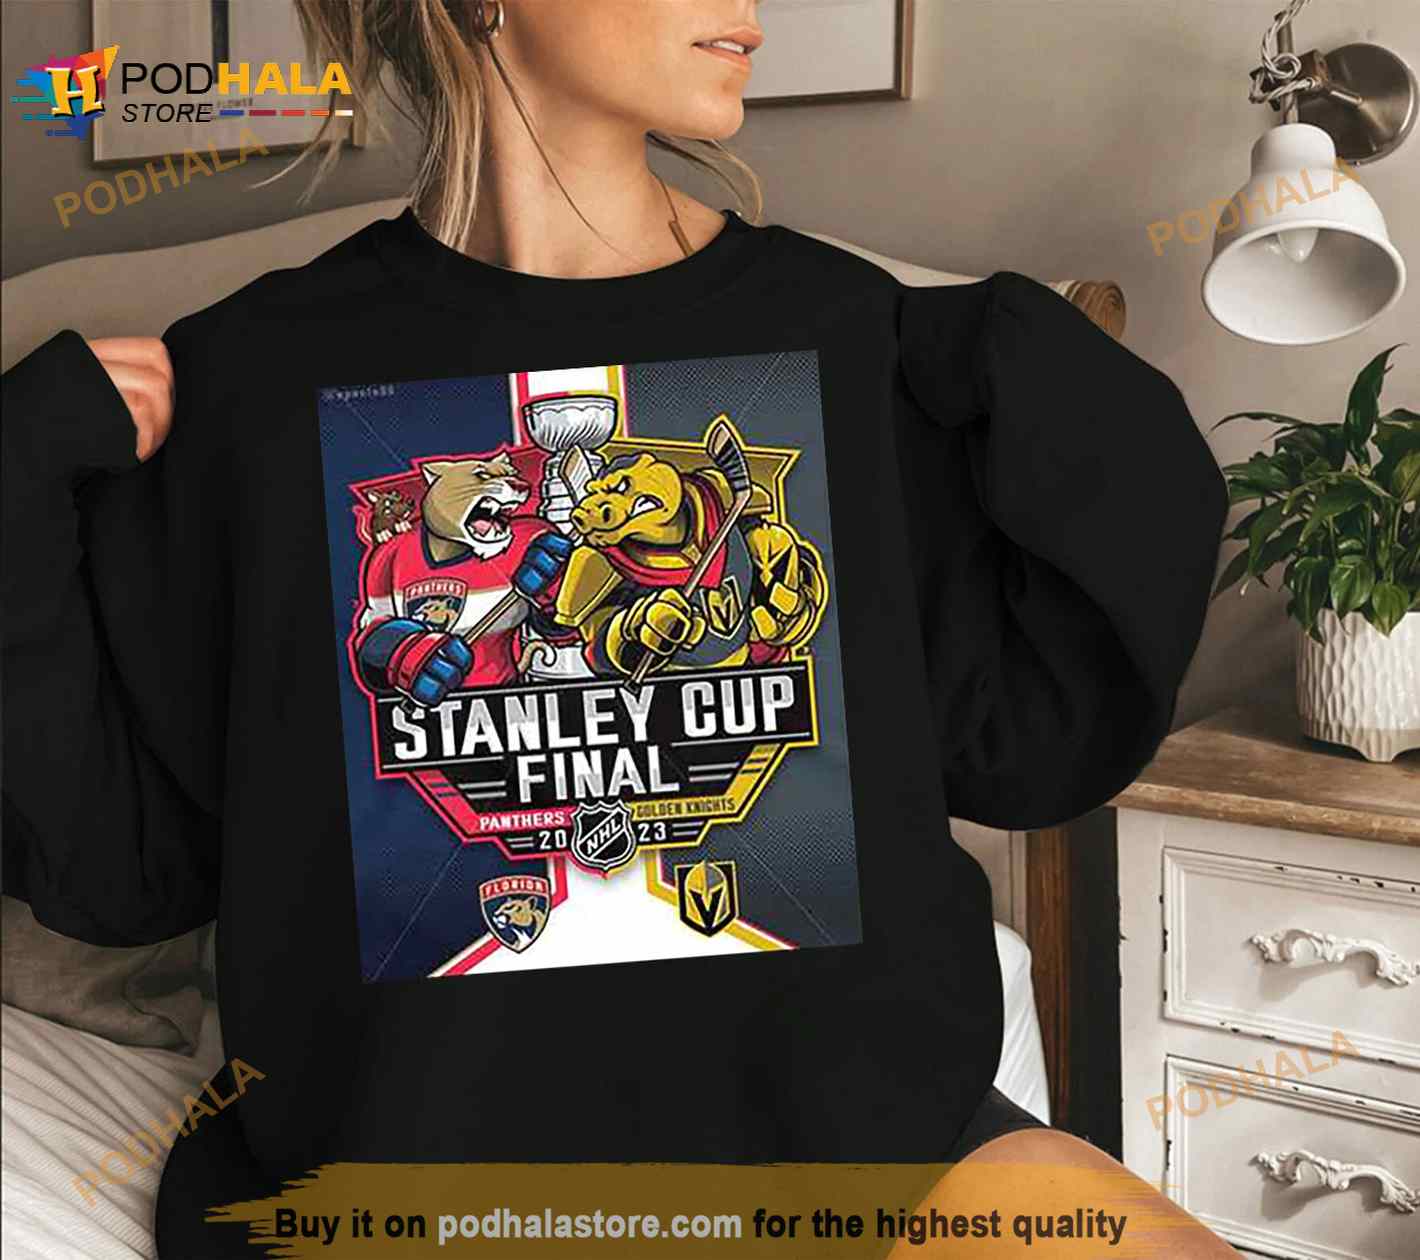 Florida Panthers vs Golden Knight NHL Playoffs 2023 Stanley Cup